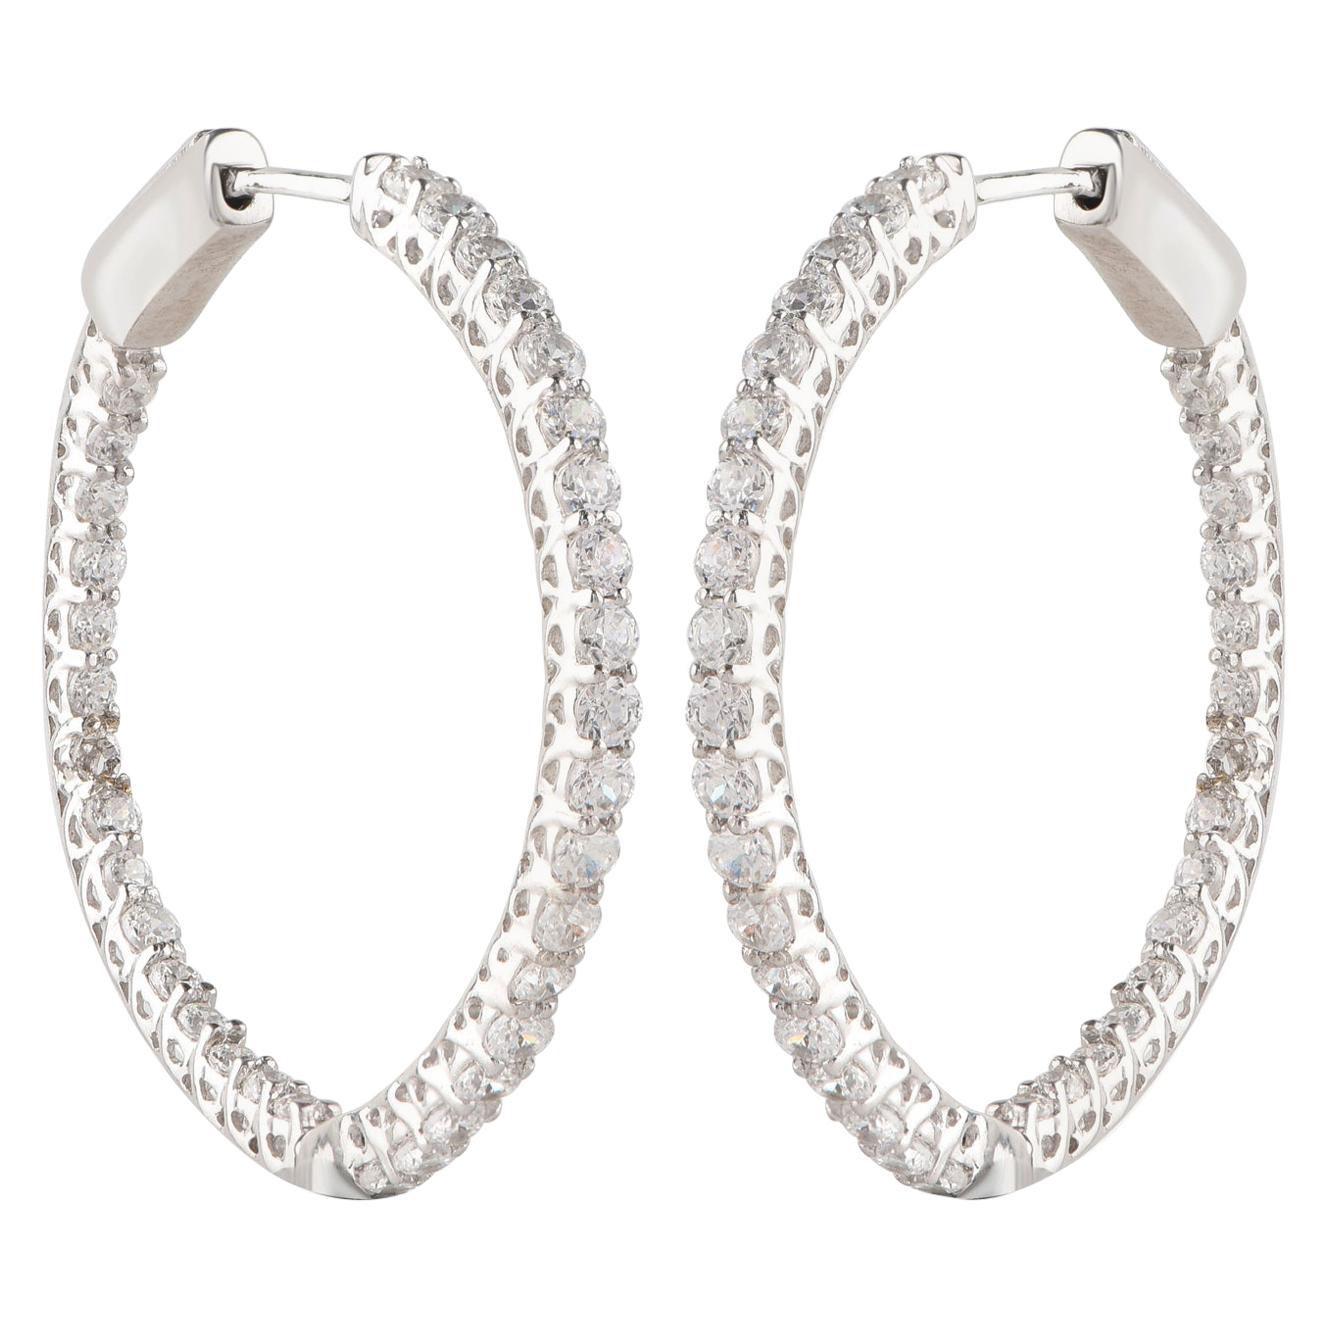 Orlandini 18 Karat White Gold and Diamond Earrings with Approximately 1 ...